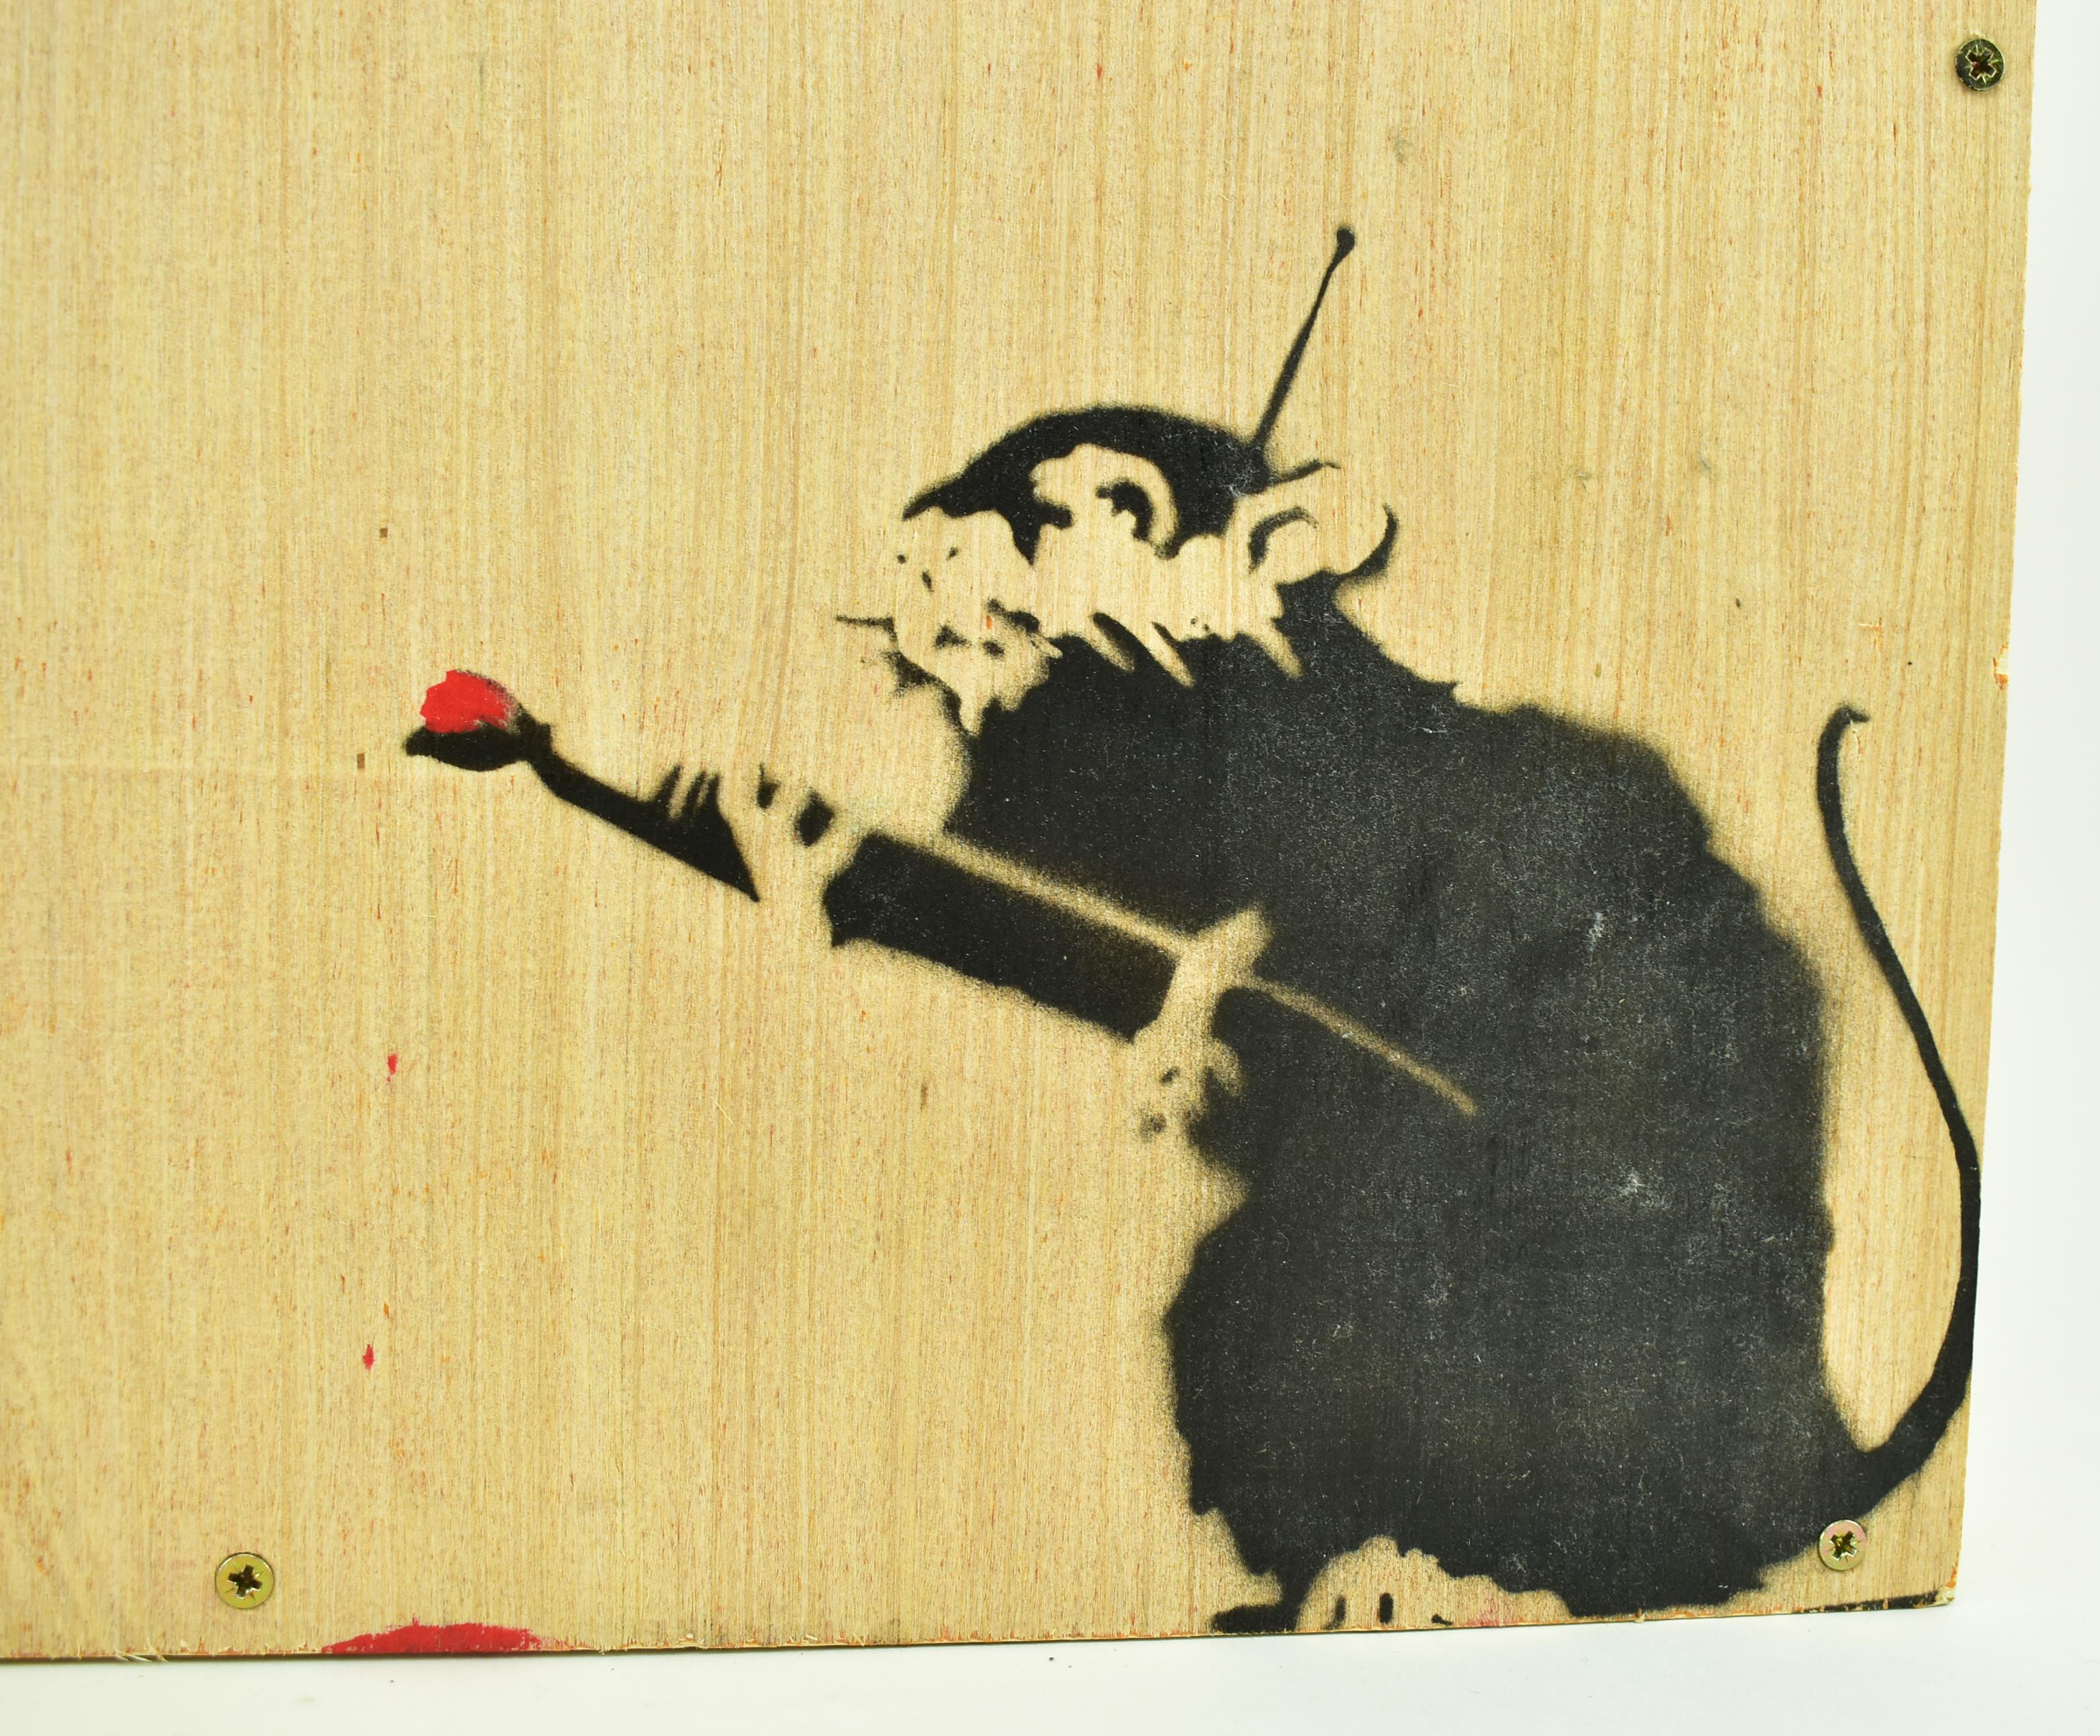 MRS BANKSY (BRITISH) - FLOWER THROWER - LOVE IS IN THE AIR - Image 10 of 11